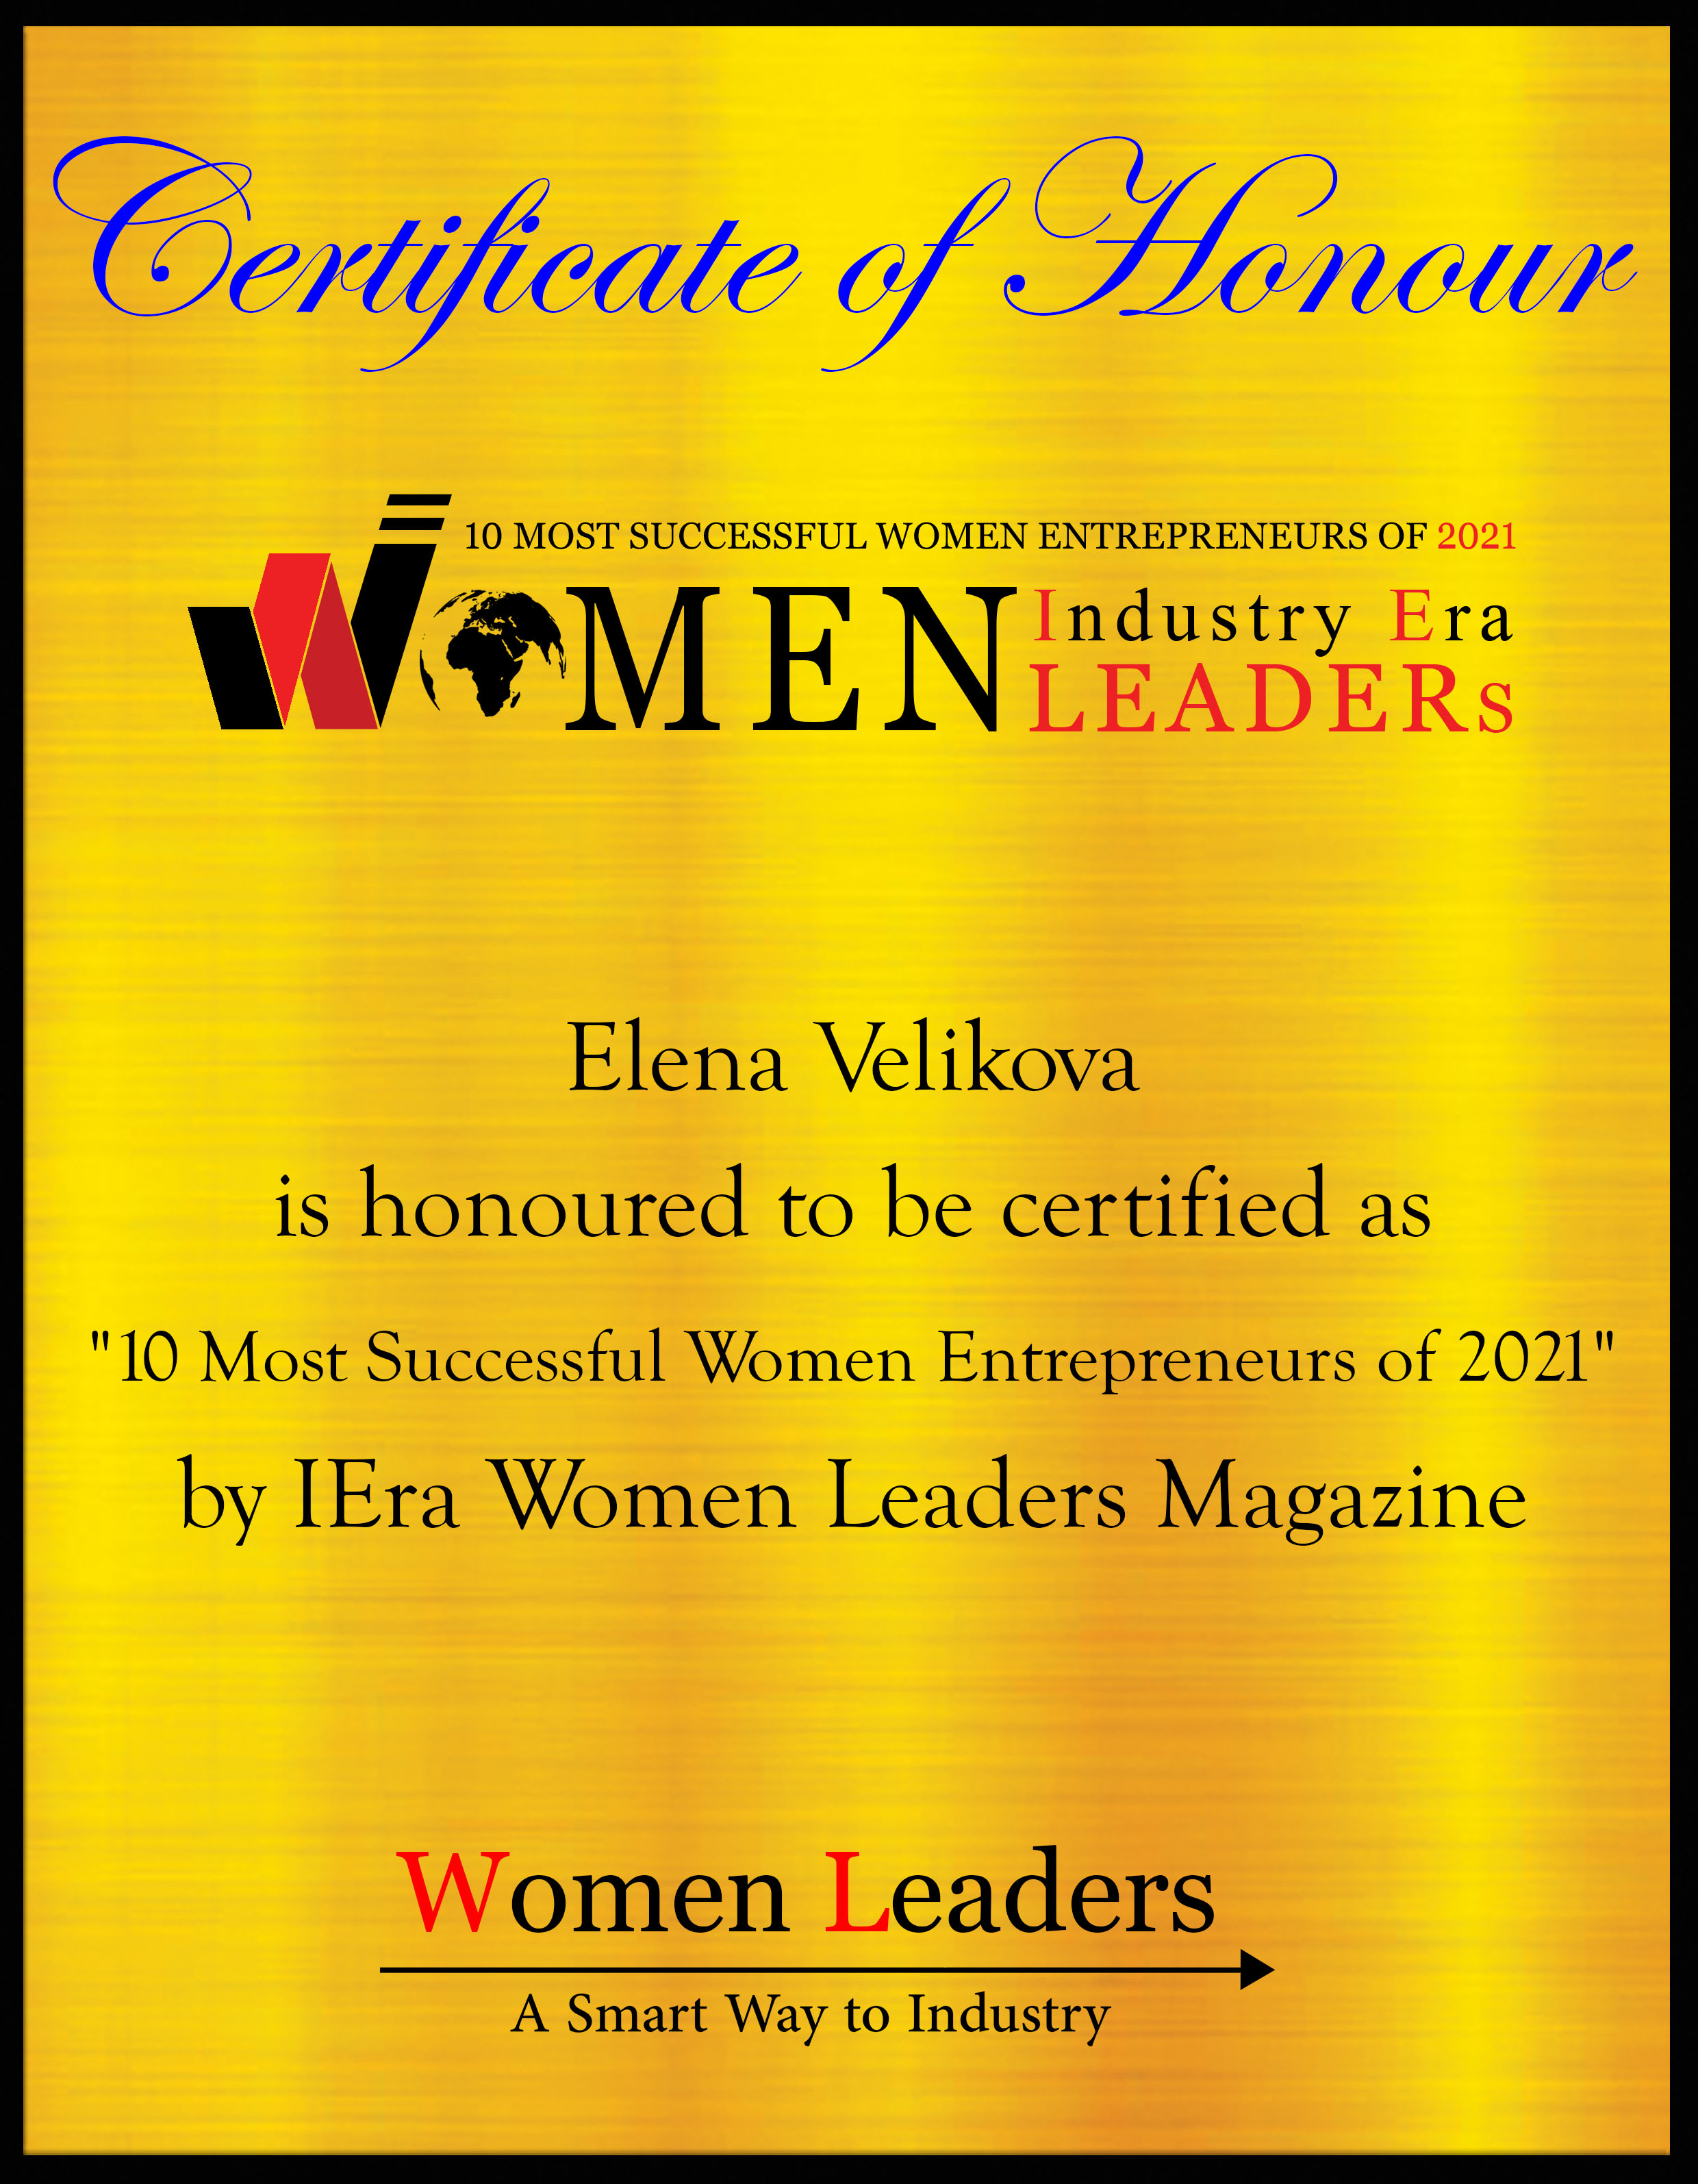 Elena Velikova CEO and Co-founder of AirDesigns, Most Successful Women Entrepreneurs of 2021